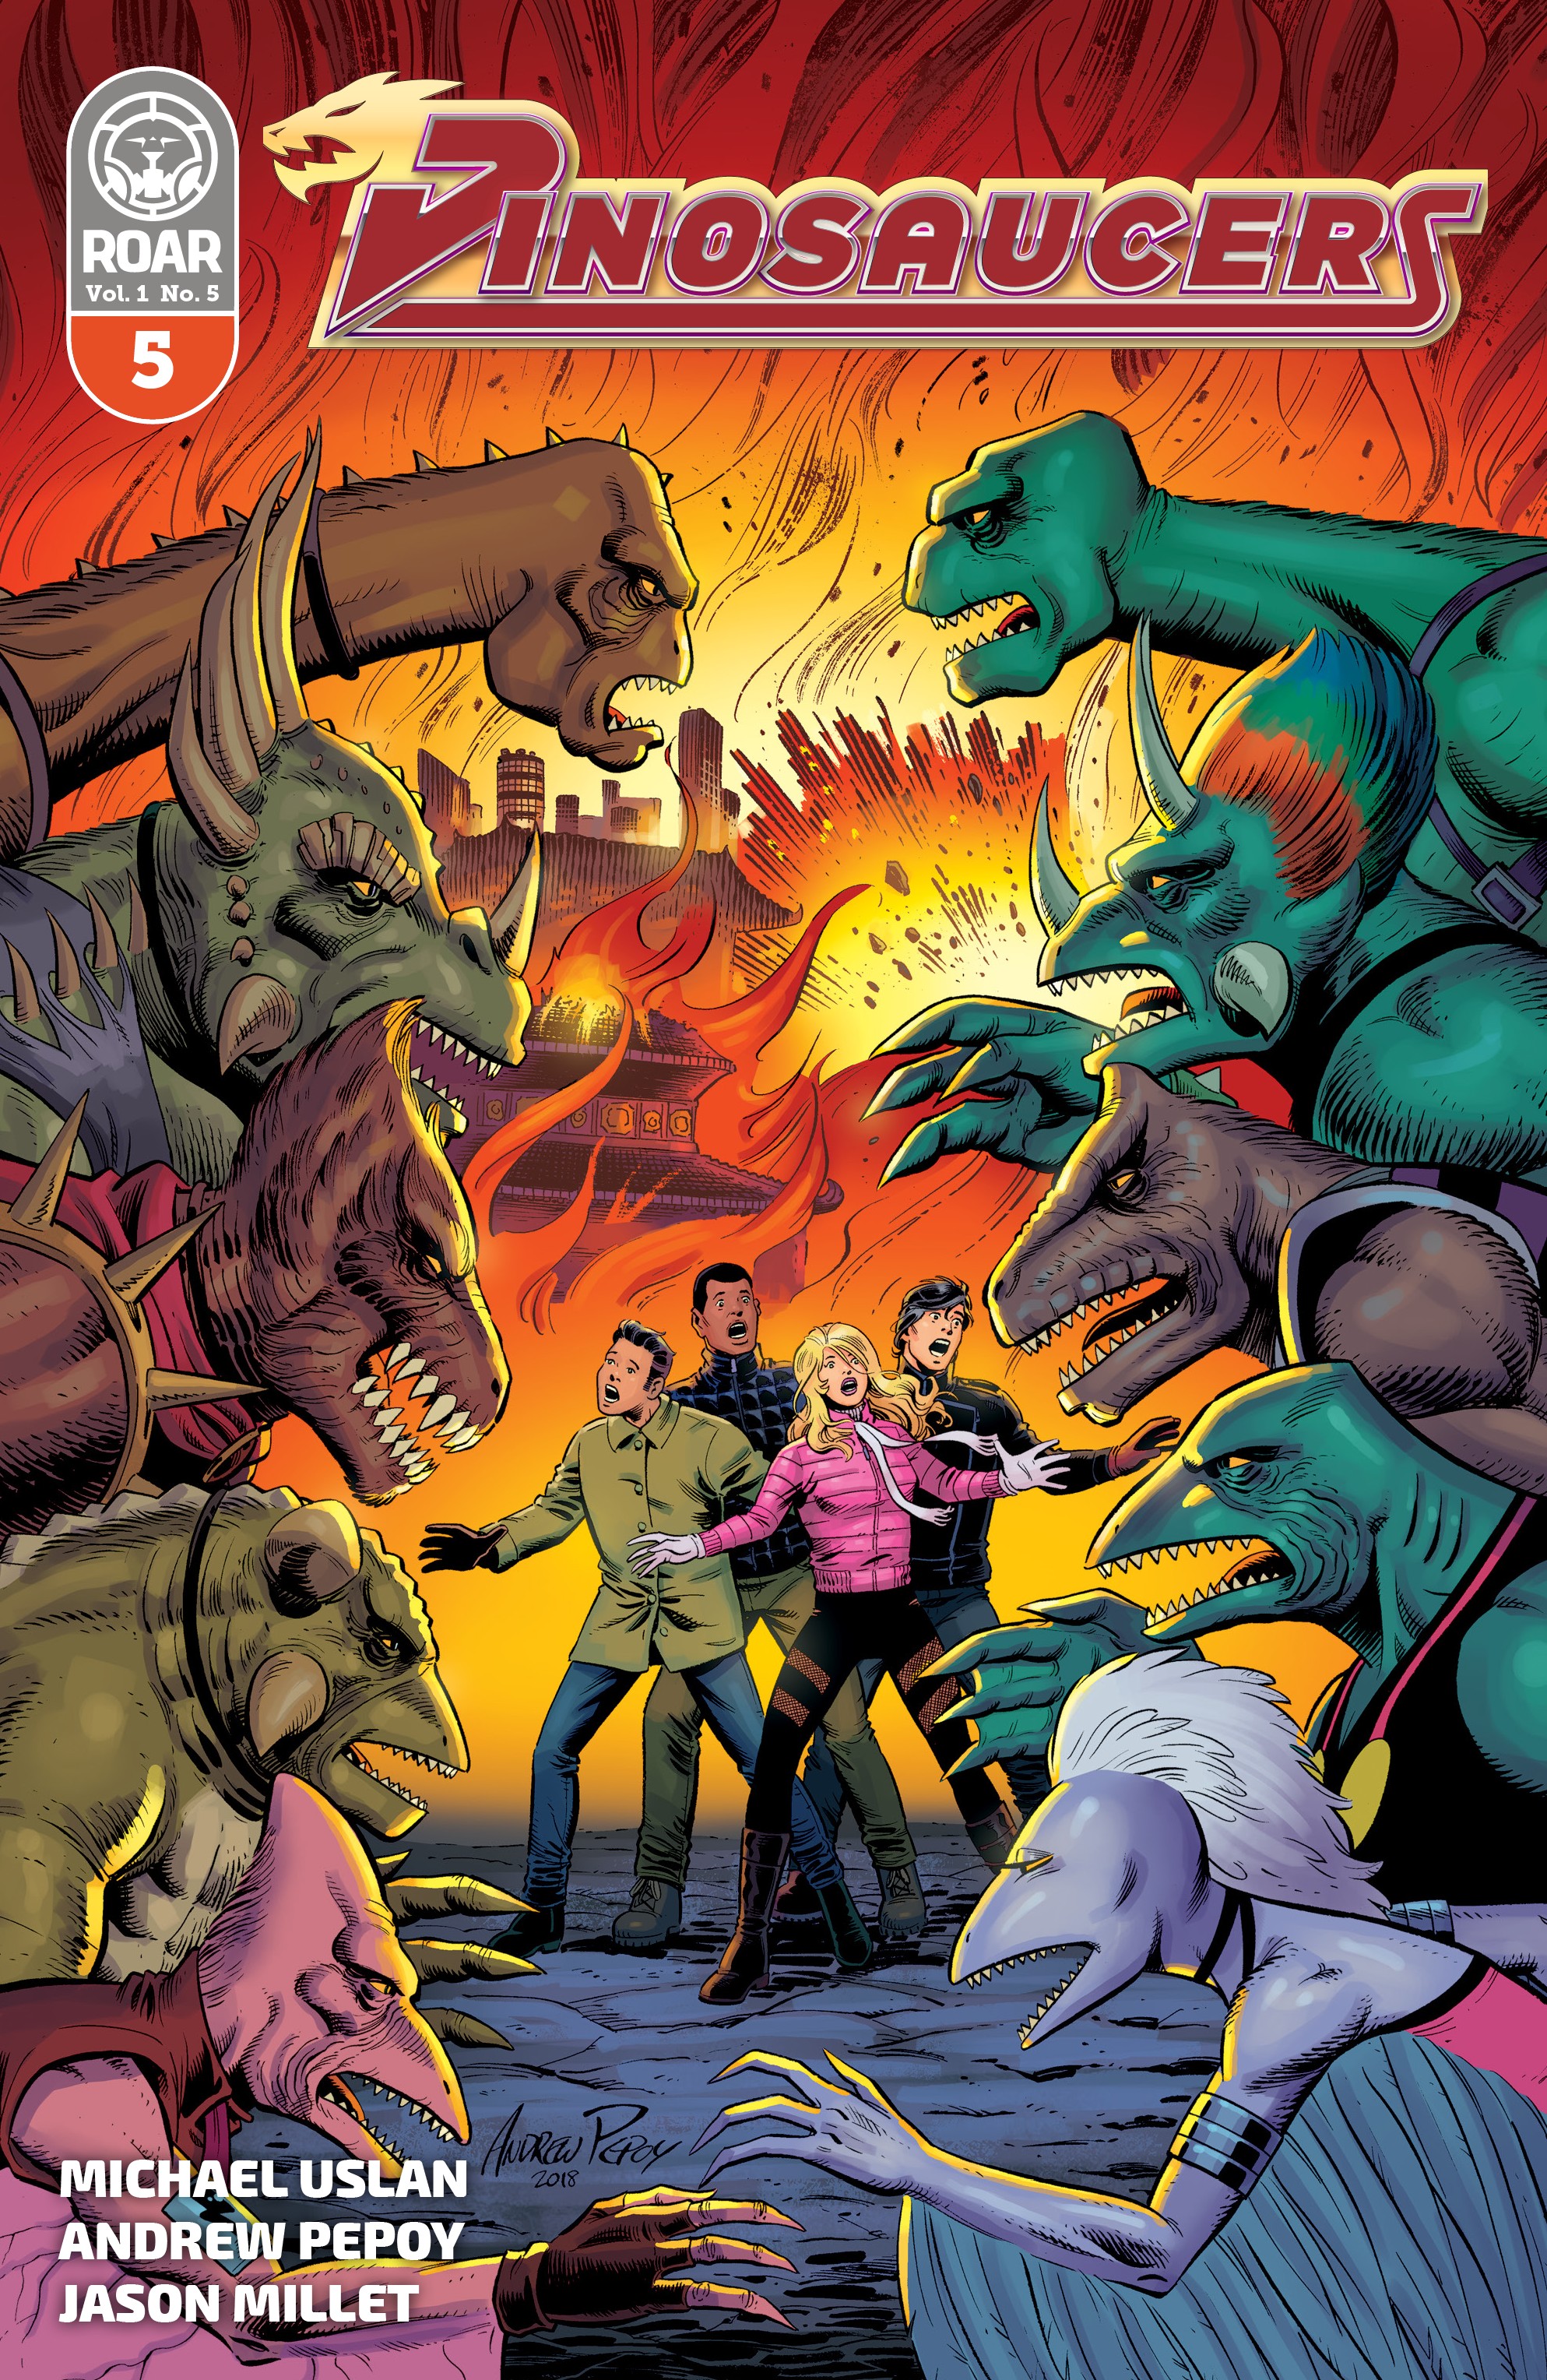 Dinosaucers Issue 5 | Viewcomic reading comics online for ...